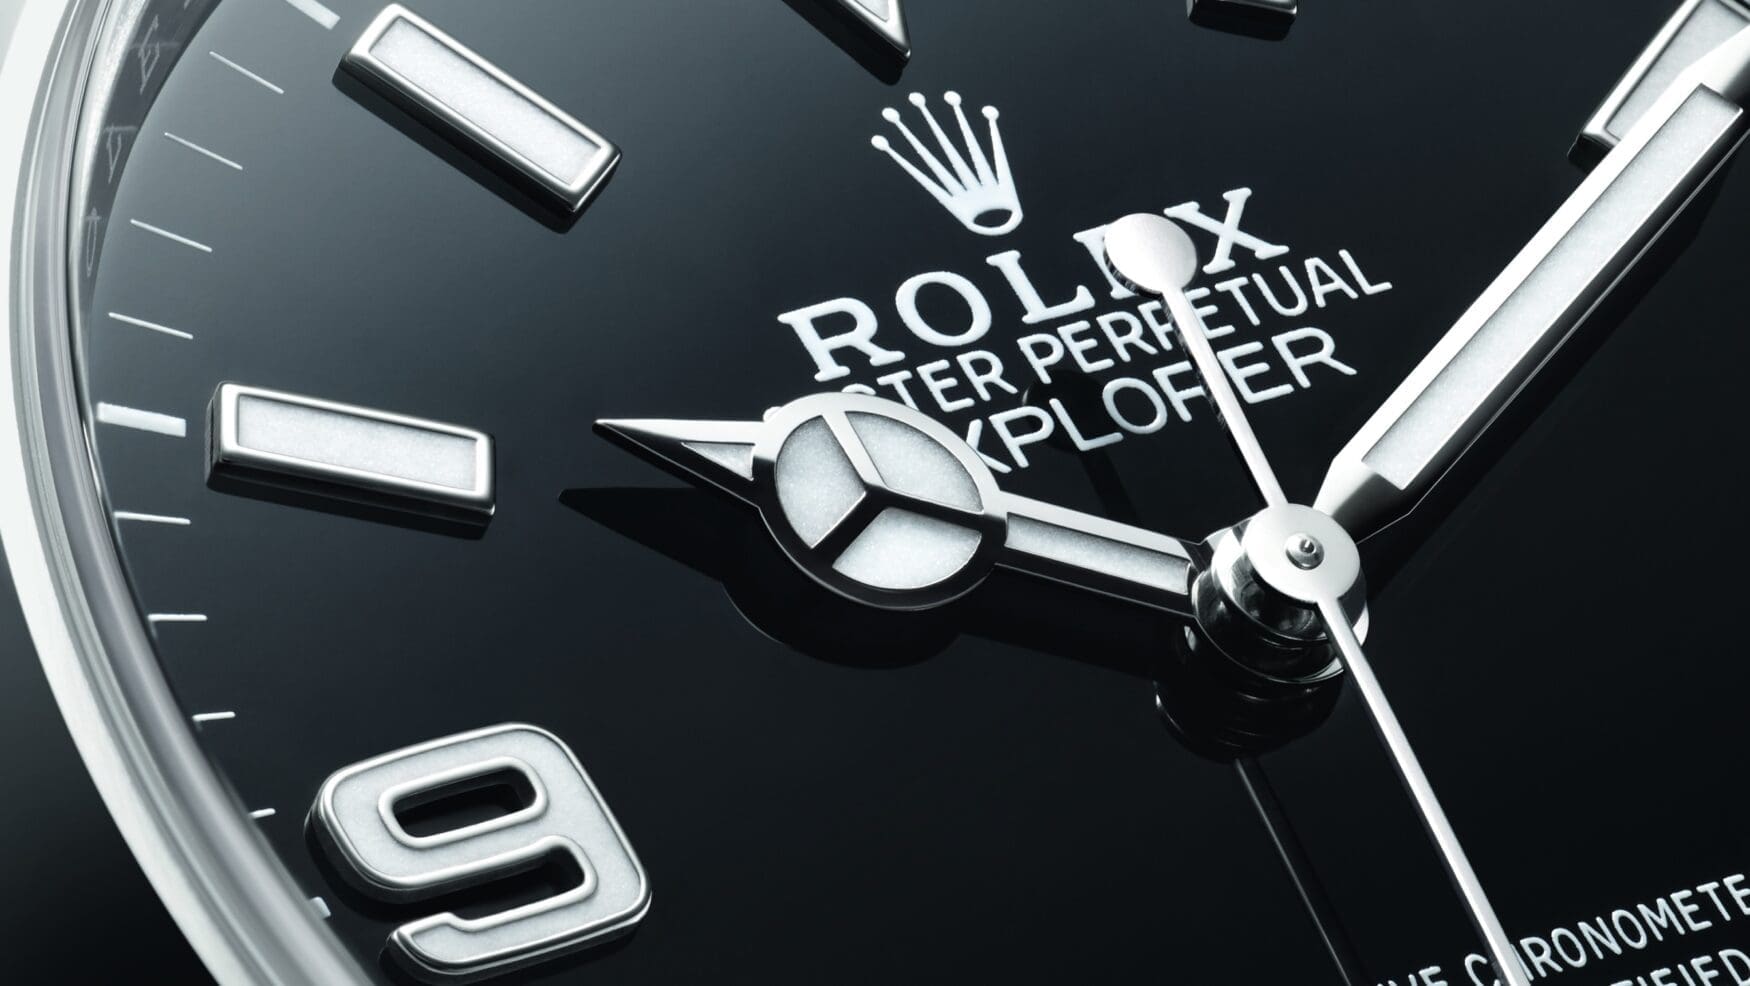 What’s the story behind Rolex’s iconic “Mercedes” hands?